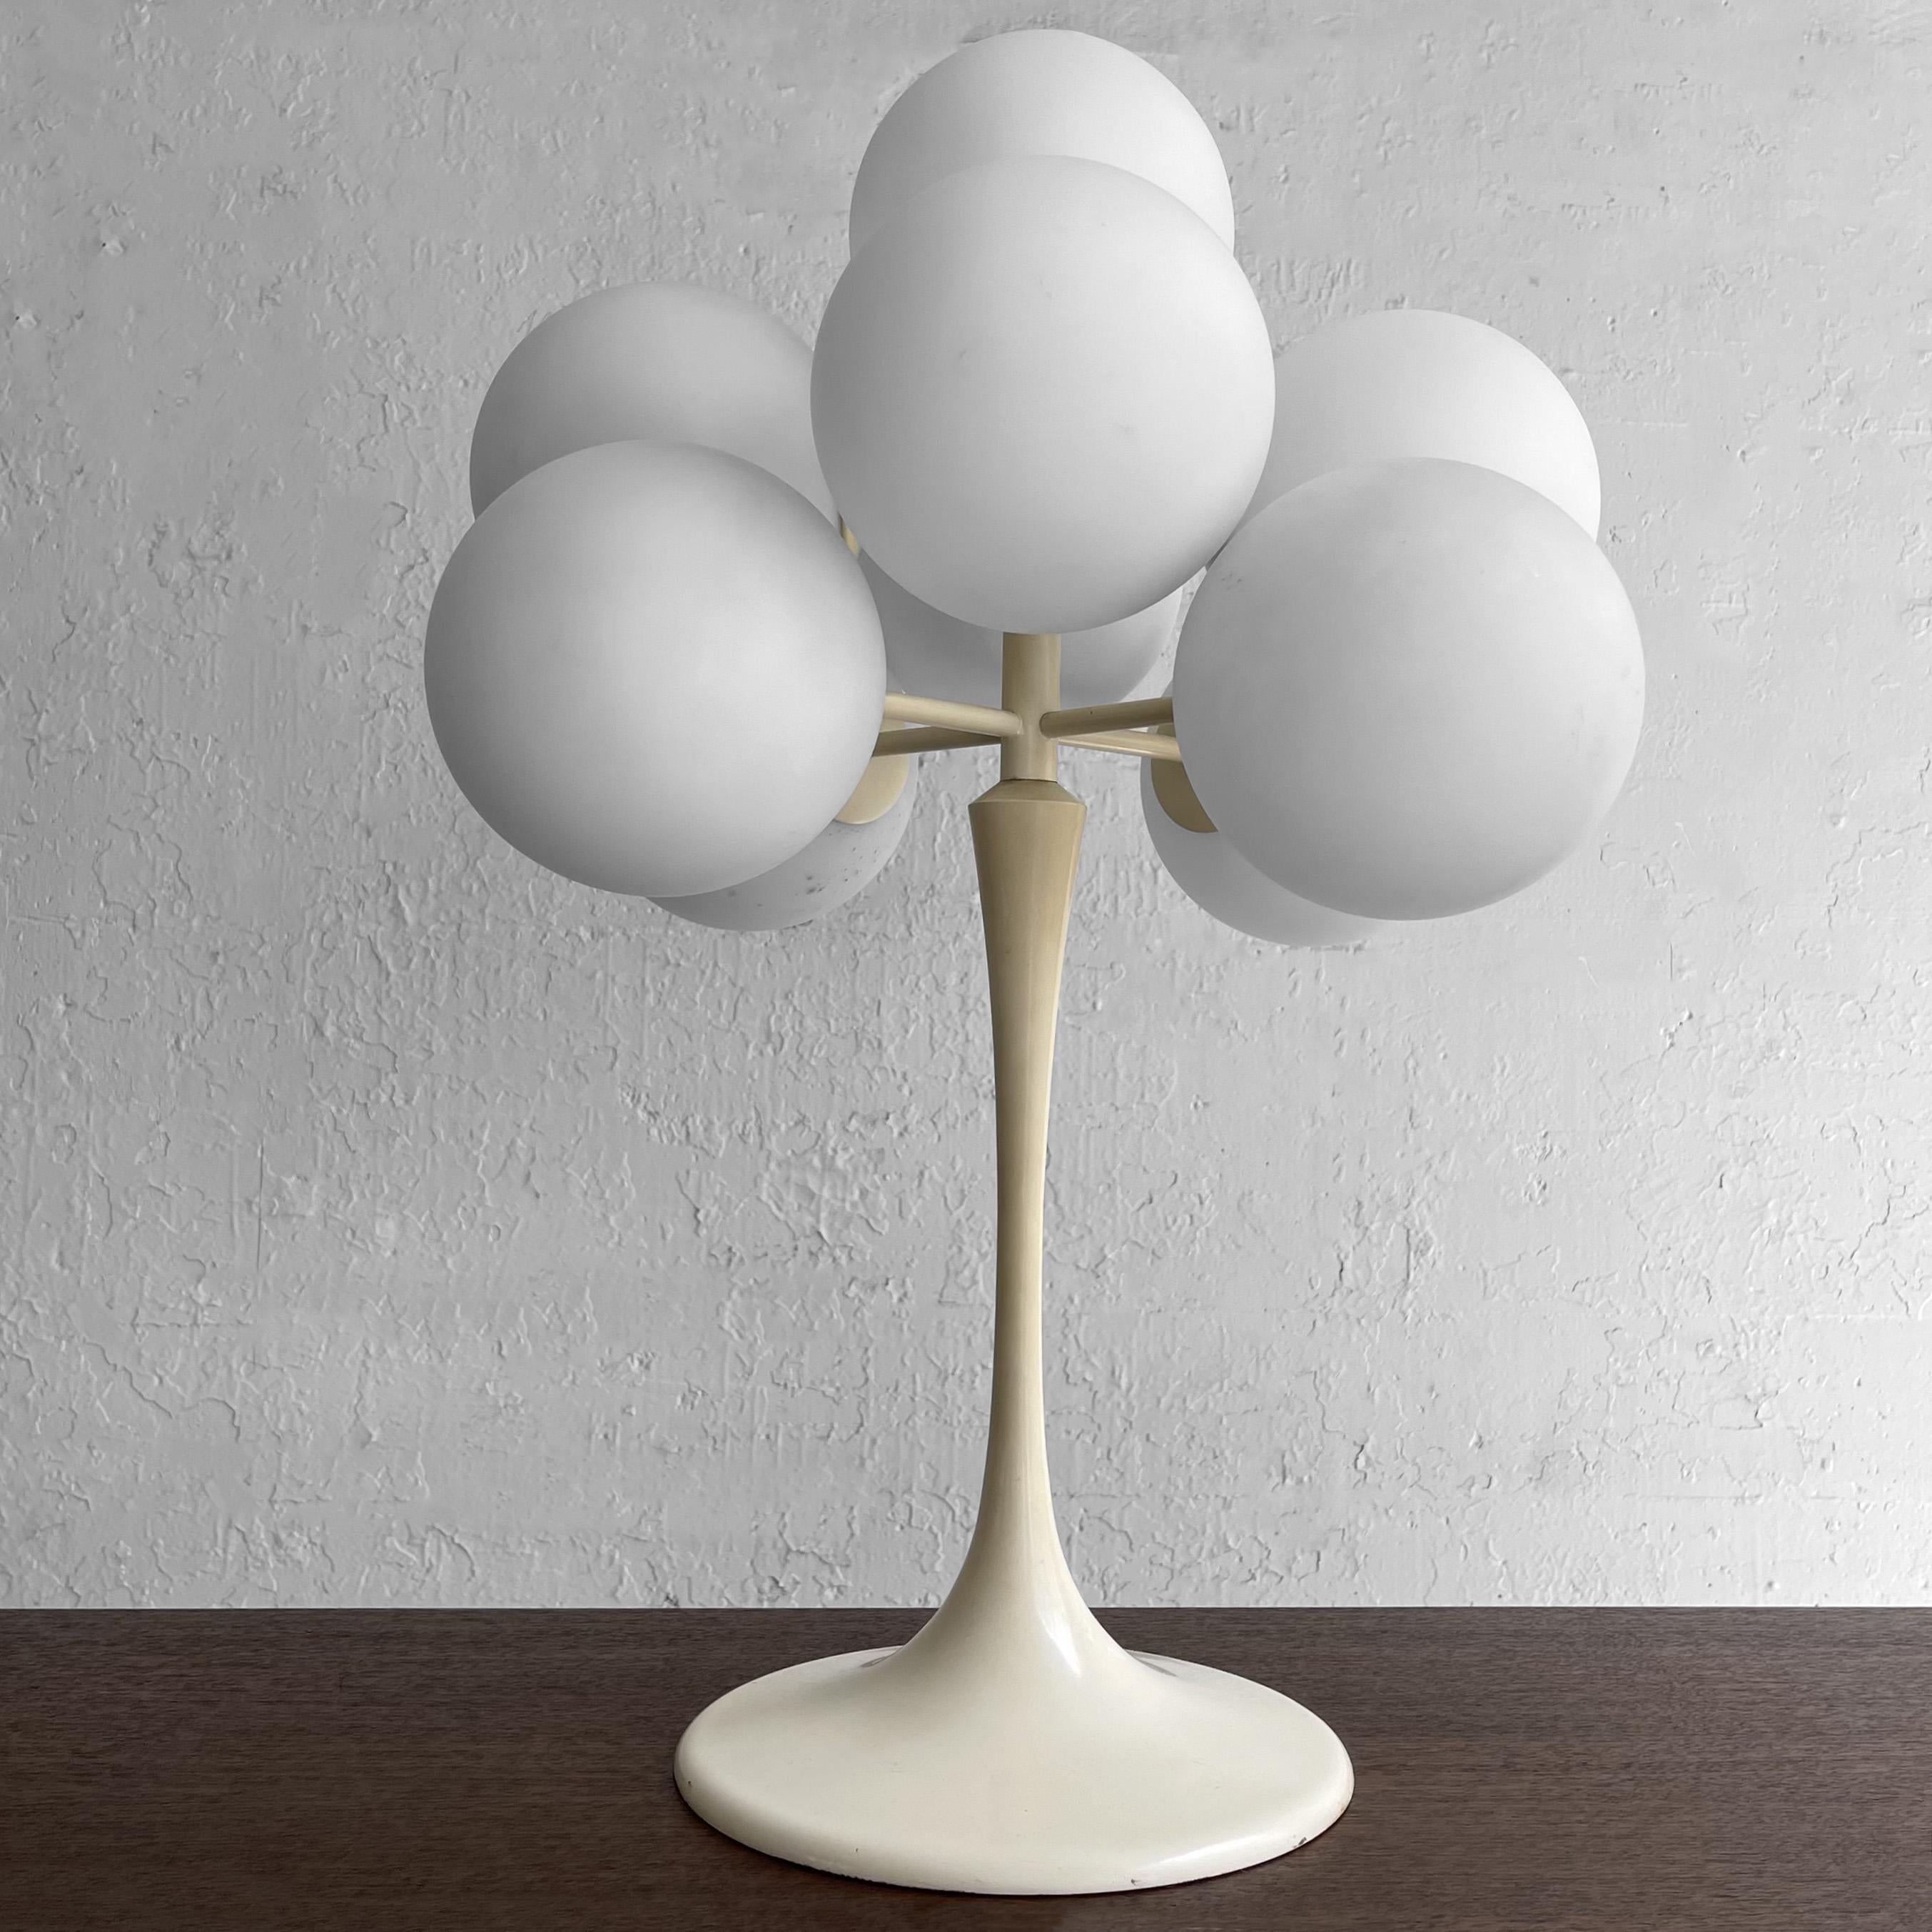 Multi Globe “Figuration” table lamp designed by Eva Renée Nele for German-Swiss lighting manufacturer Temde Leuchten features an enameled metal tulip base with a cluster of nine frosted glass globes. Collectible, statement lighting.